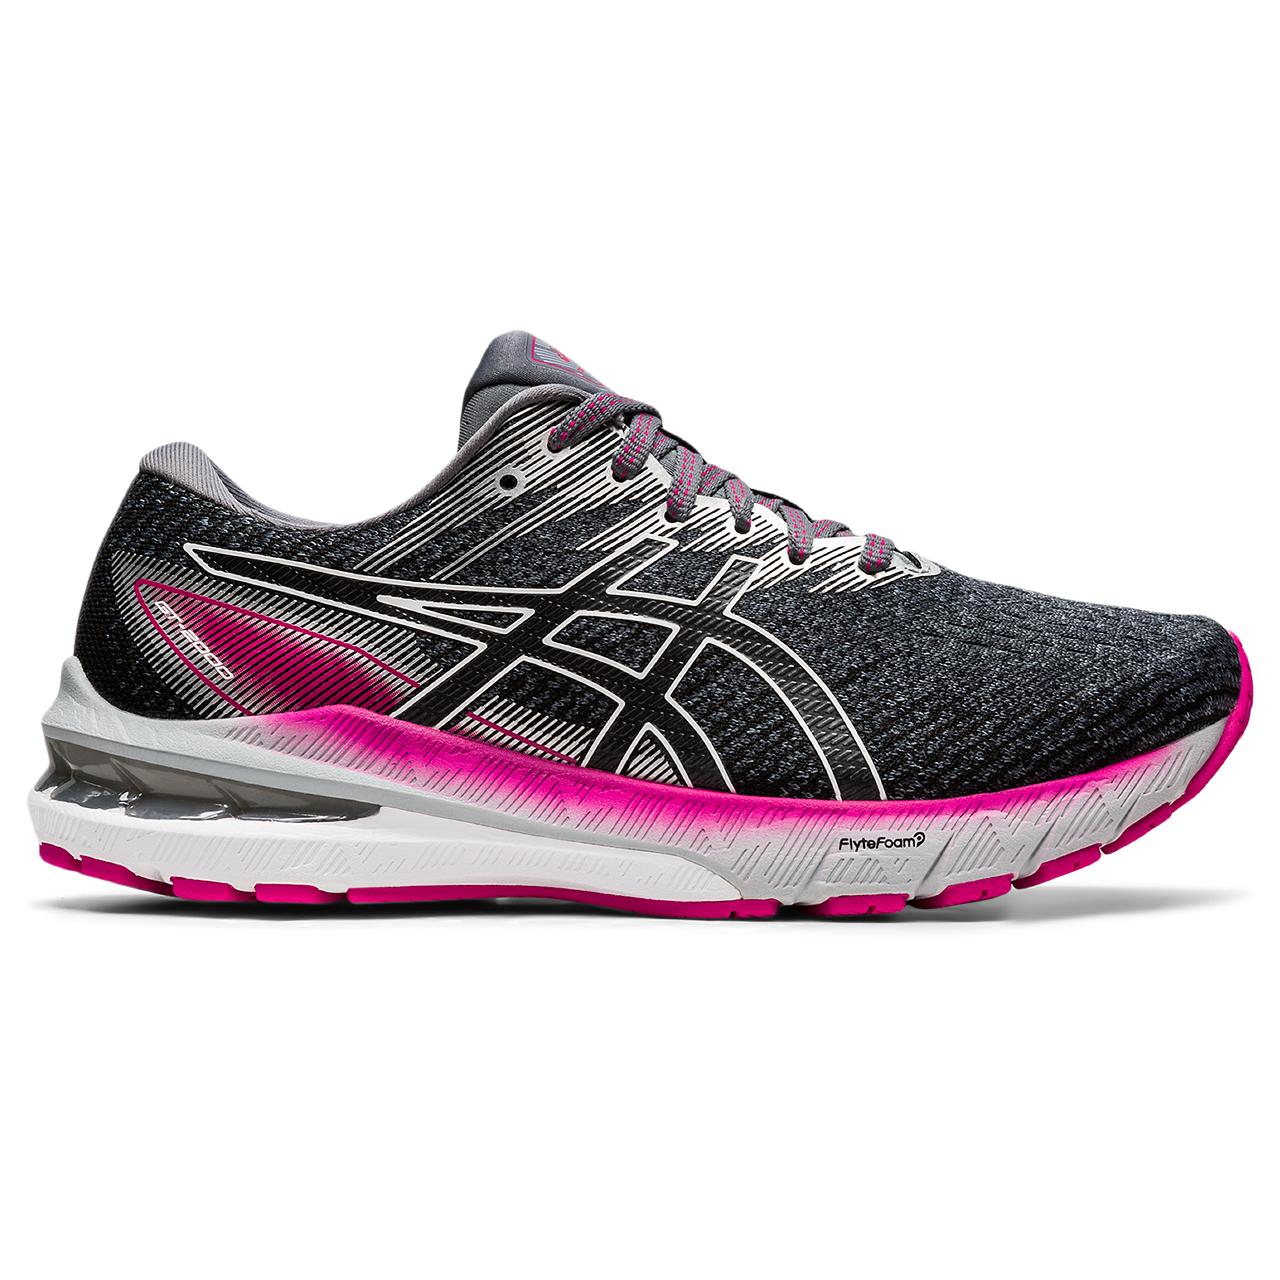 This is the wide fitting version of the Women's ASICS GT-2000 V10.  The color is Sheet Rock/Pink Rave